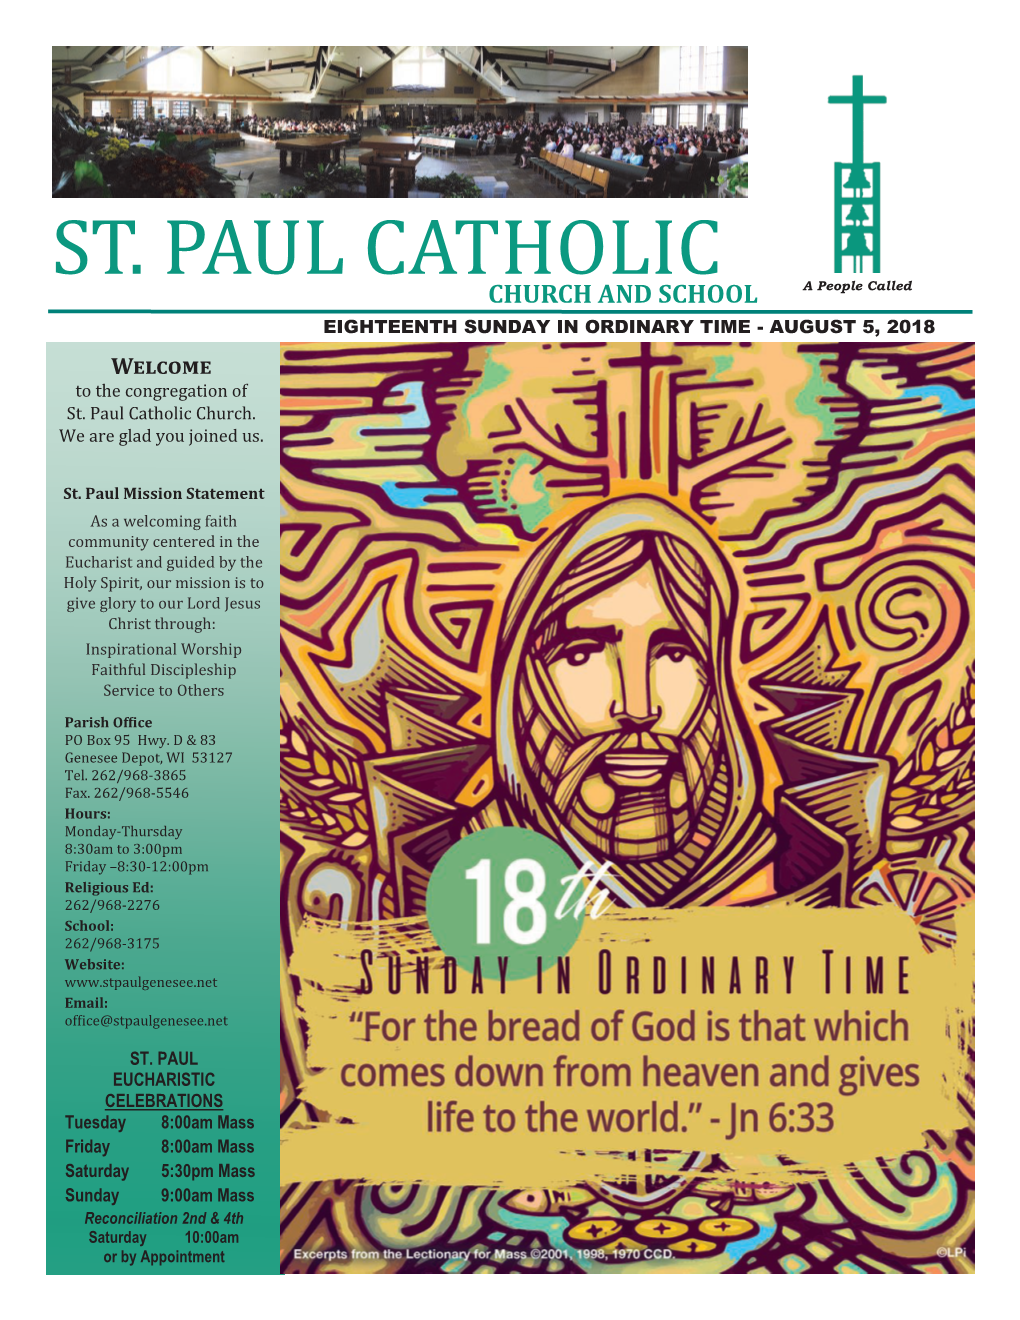 ST. PAUL CATHOLIC CHURCH and SCHOOL a People Called EIGHTEENTH SUNDAY in ORDINARY TIME - AUGUST 5, 2018 Welcome to the Congregation of St